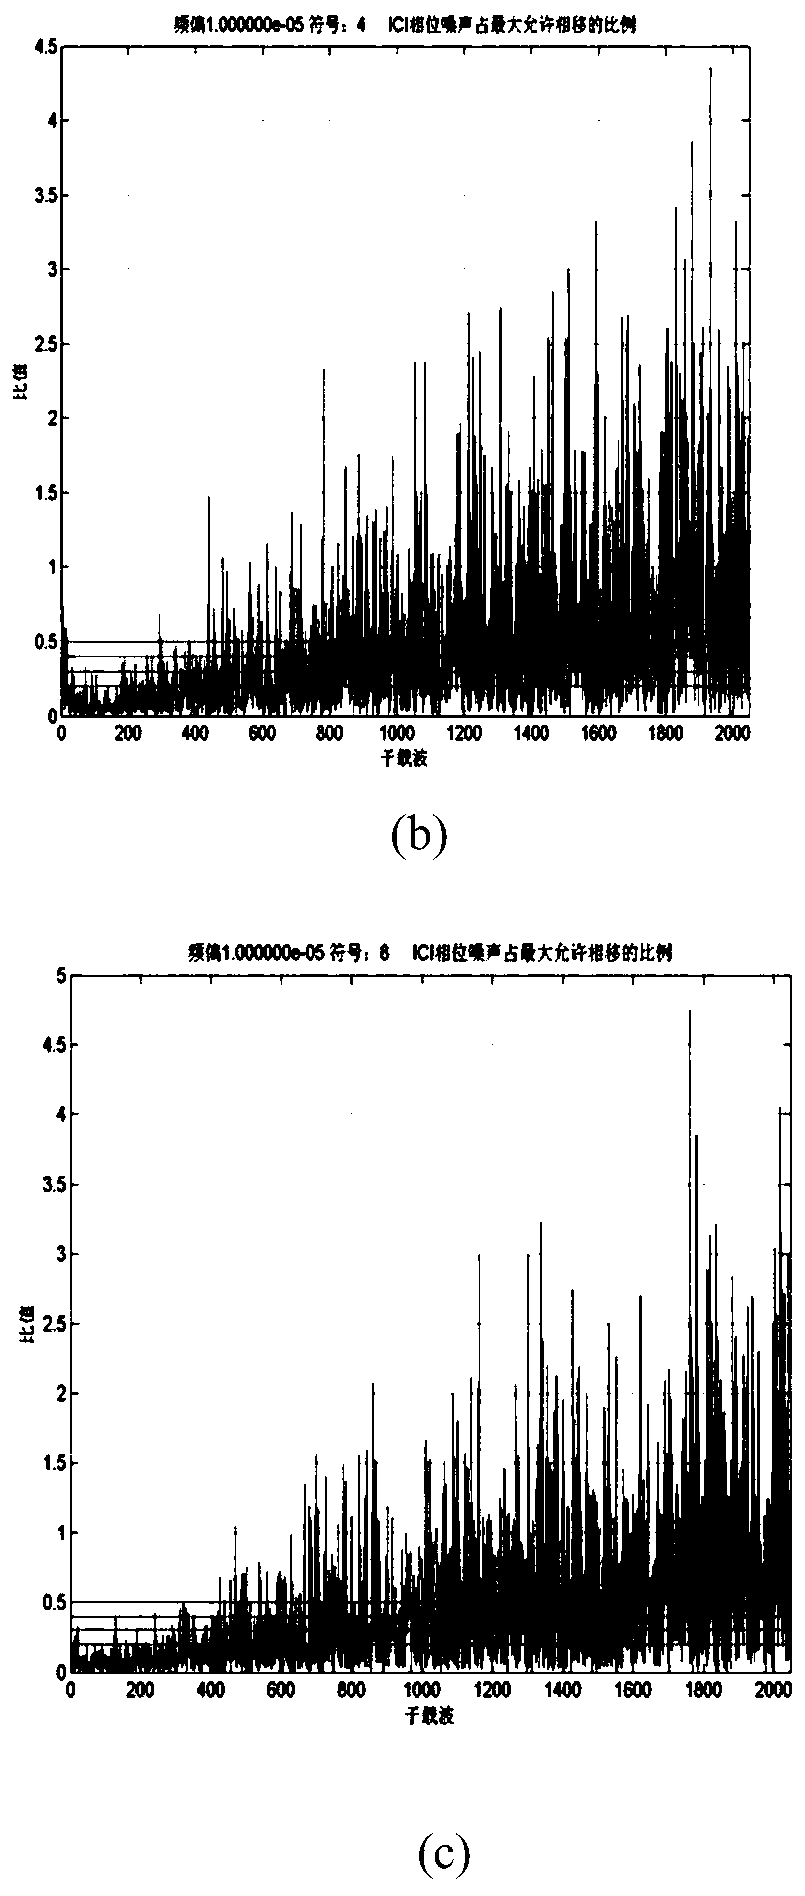 A Blind Estimation Method of Ofdm Sampling Frequency Offset with High Carrier Number and High Modulation Level